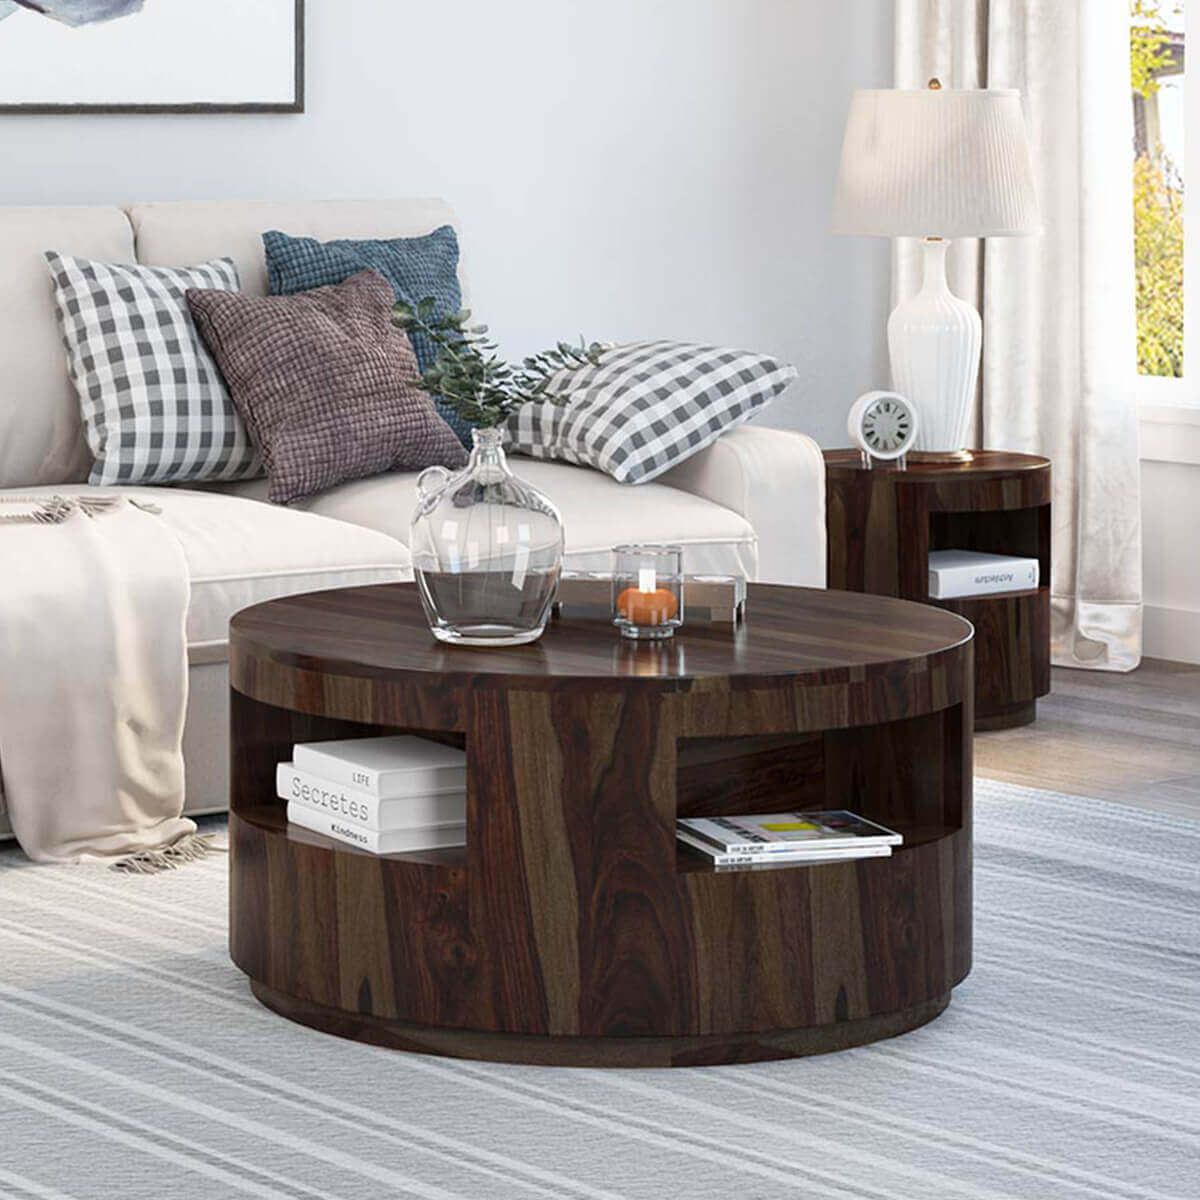 Ladonia Rustic Solid Wood Round Coffee Table Intended For Rustic Round Coffee Tables (View 5 of 20)